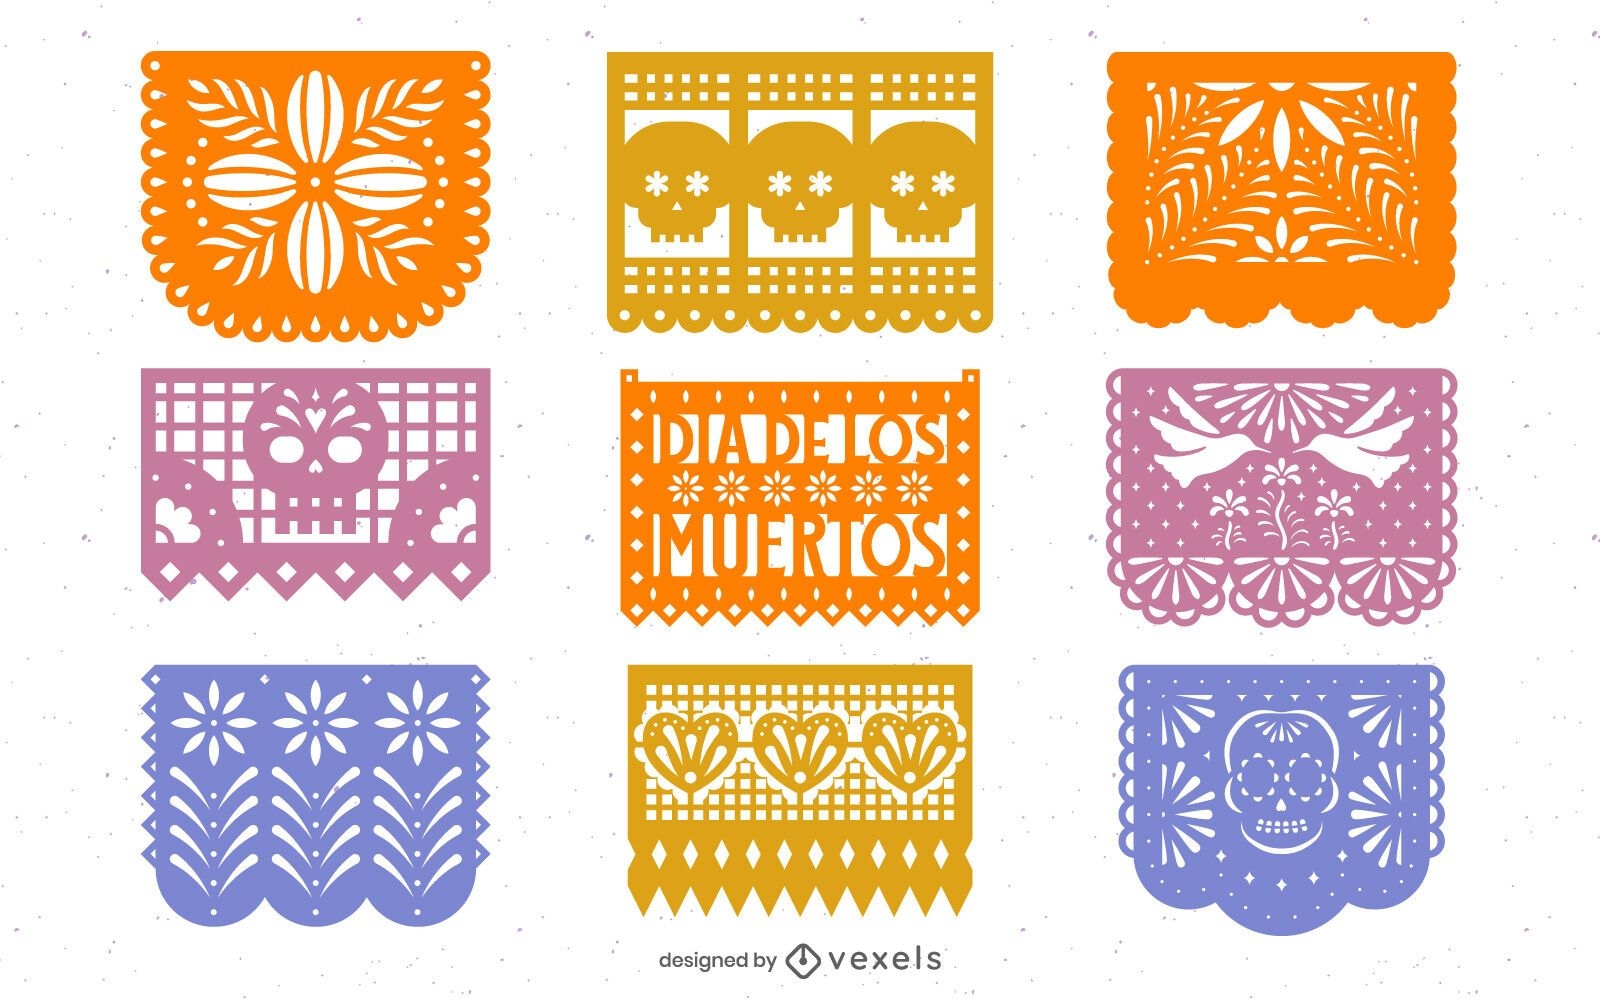 Day of the Dead Papel Picado Design Pack